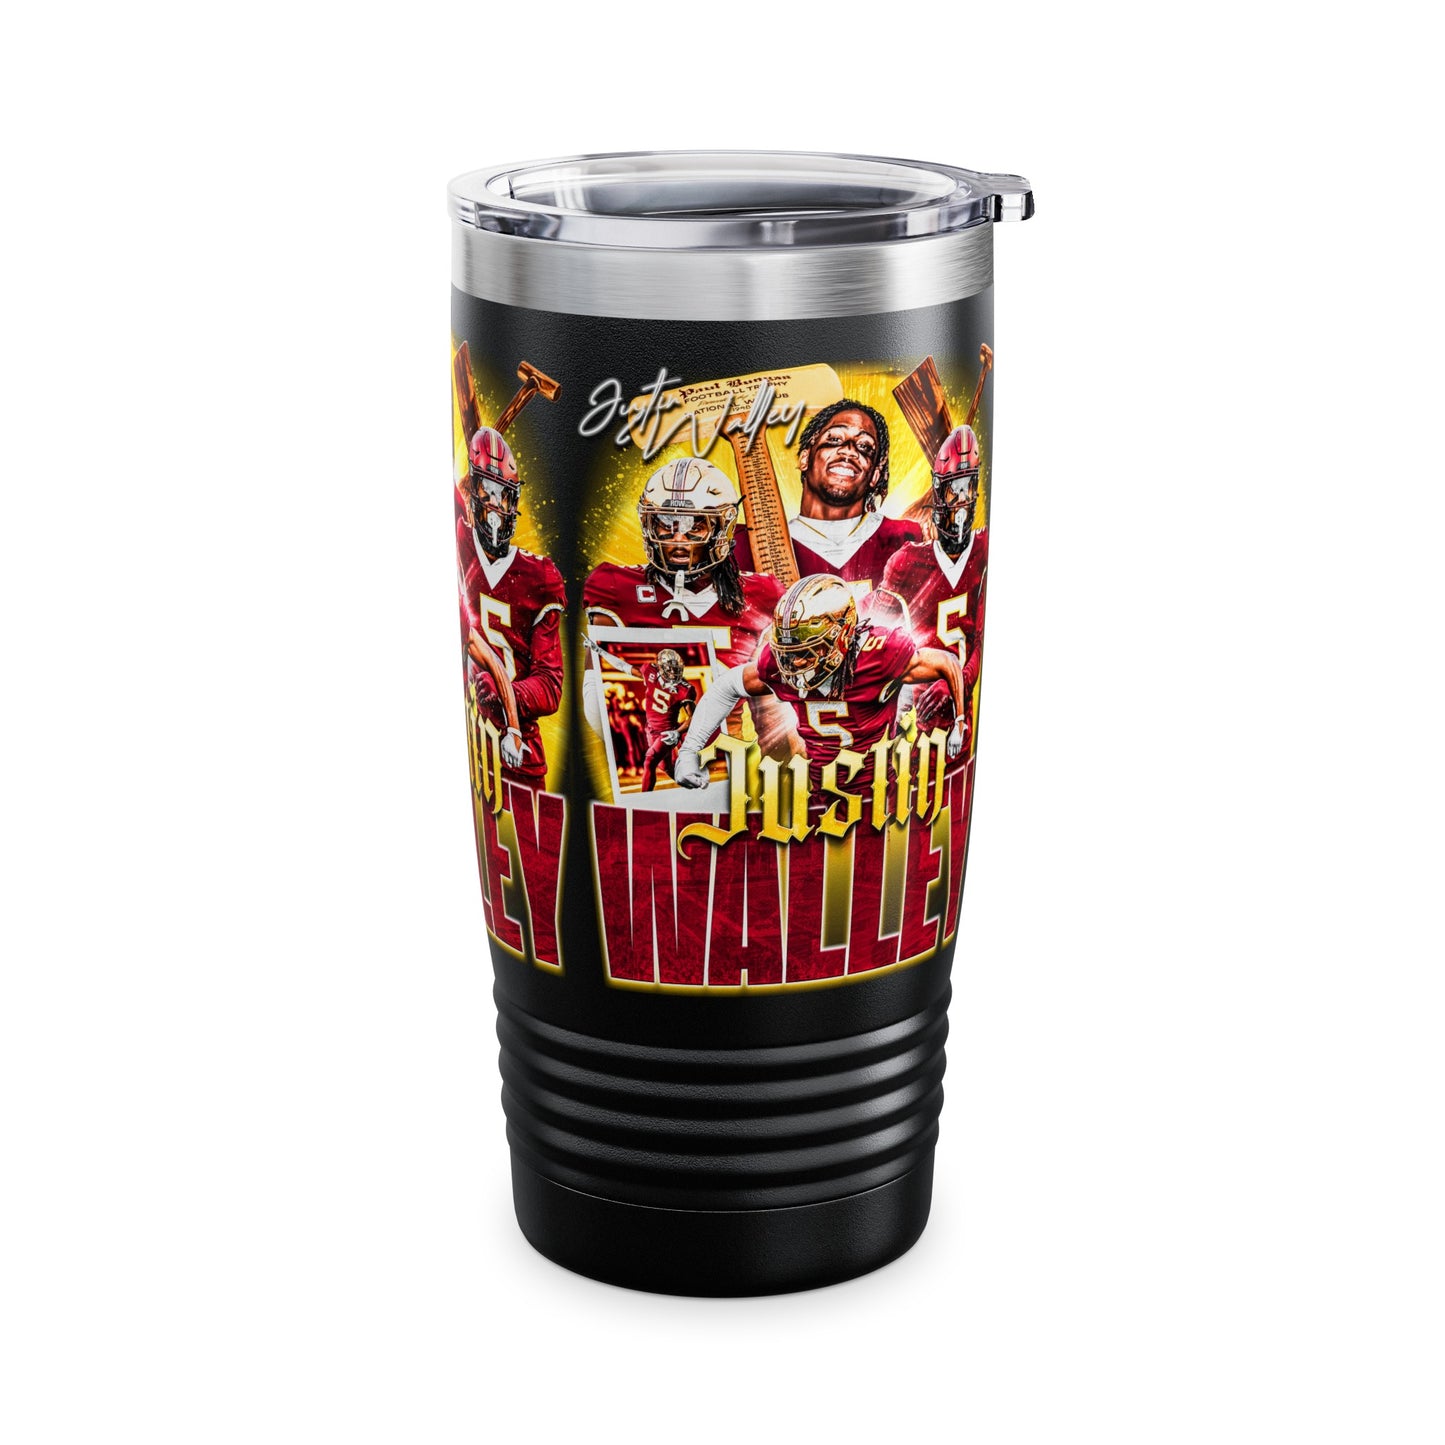 WALLEY STAINLESS STEEL TUMBLER